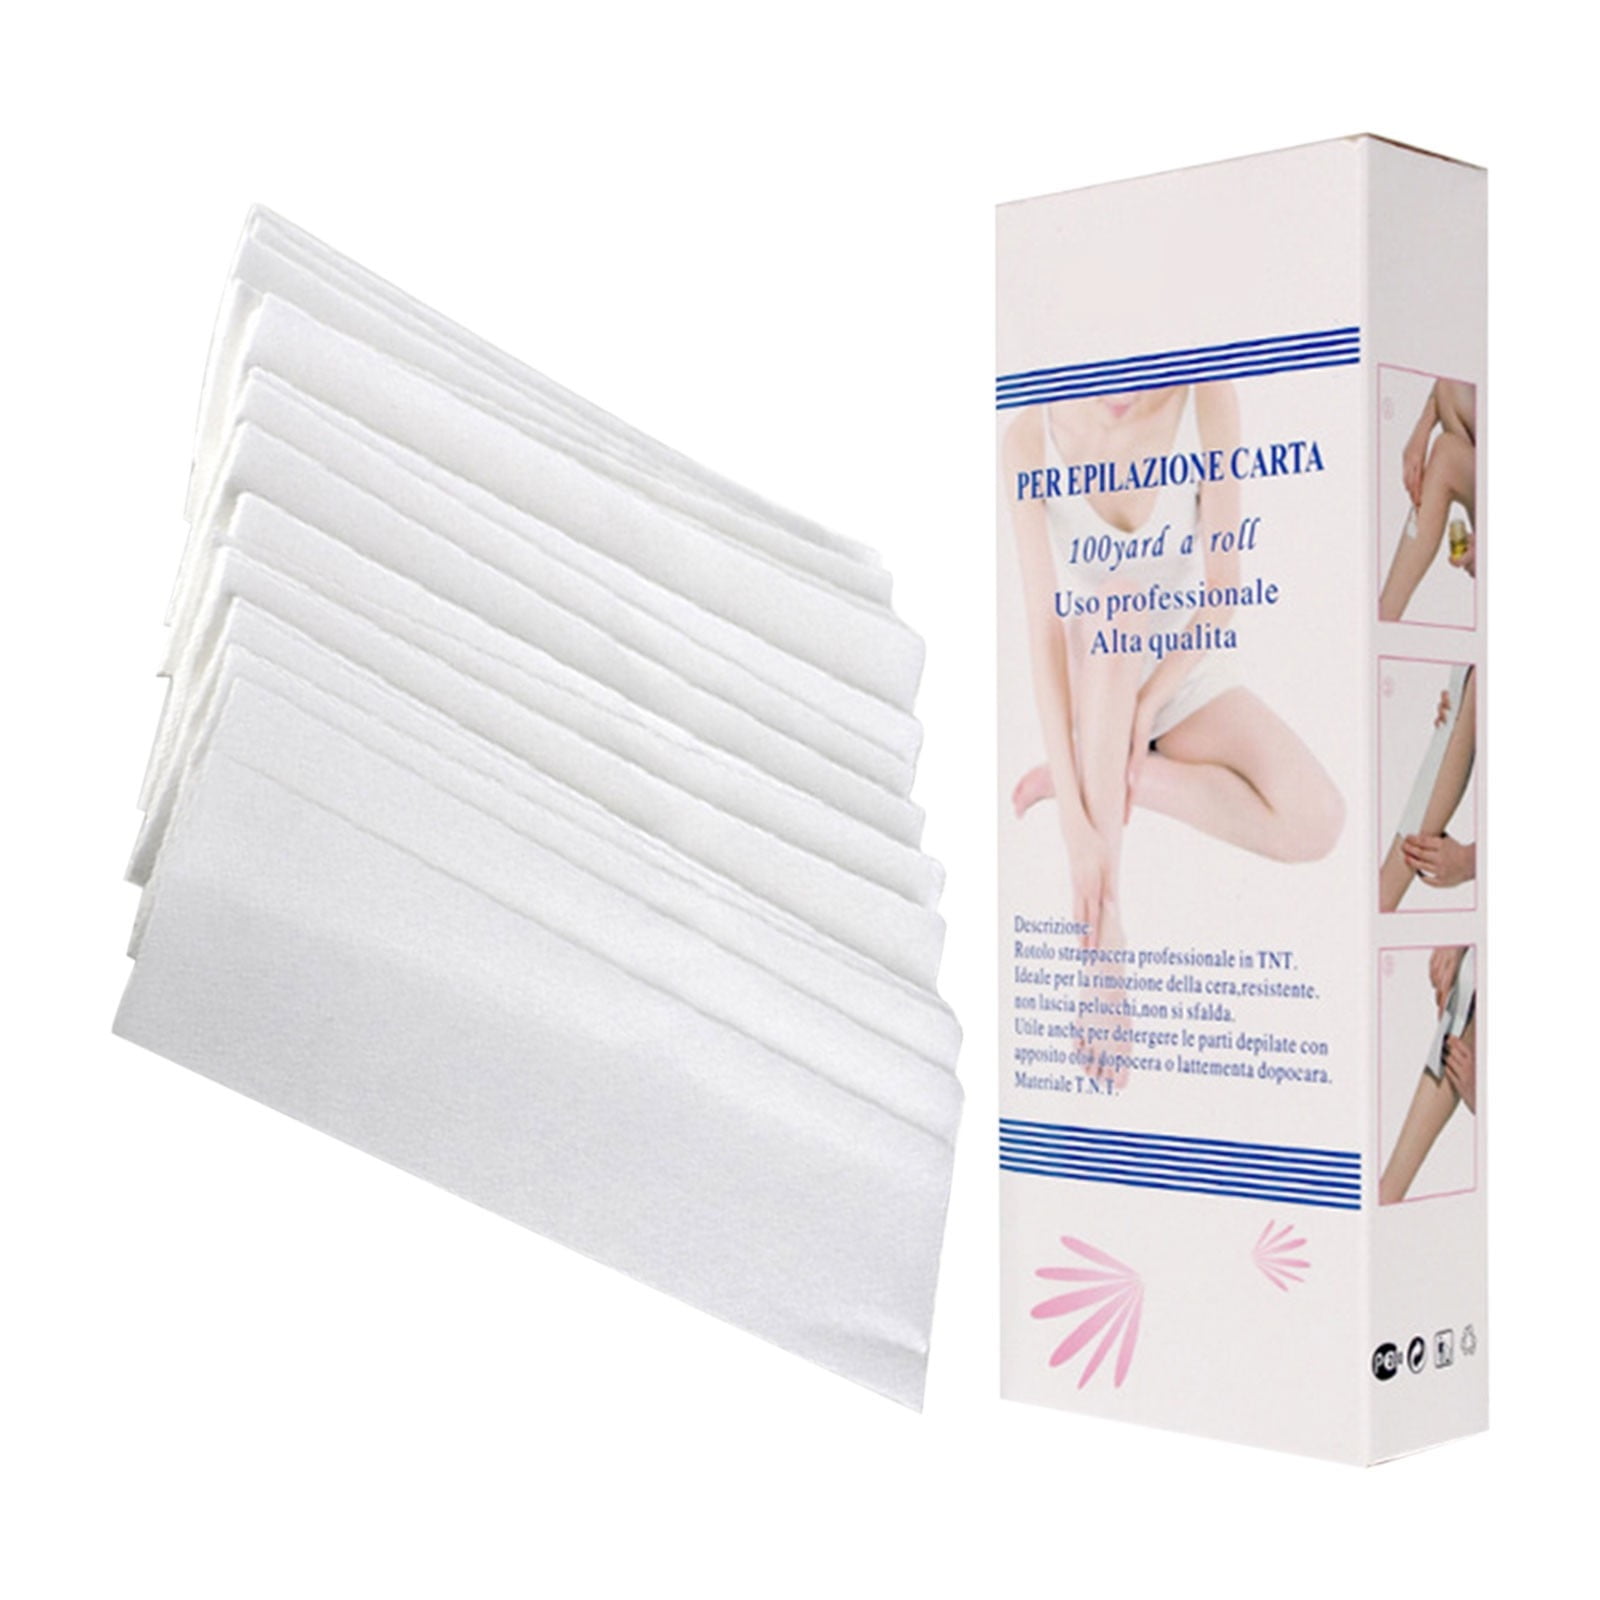 Hsmqhjwe European Wax Beads for Hair Removal Nonwoven Waxing Strips 100 Piece Hair Removal Wax Paper Strips for Facial Body Leg Eyebrow Epilating